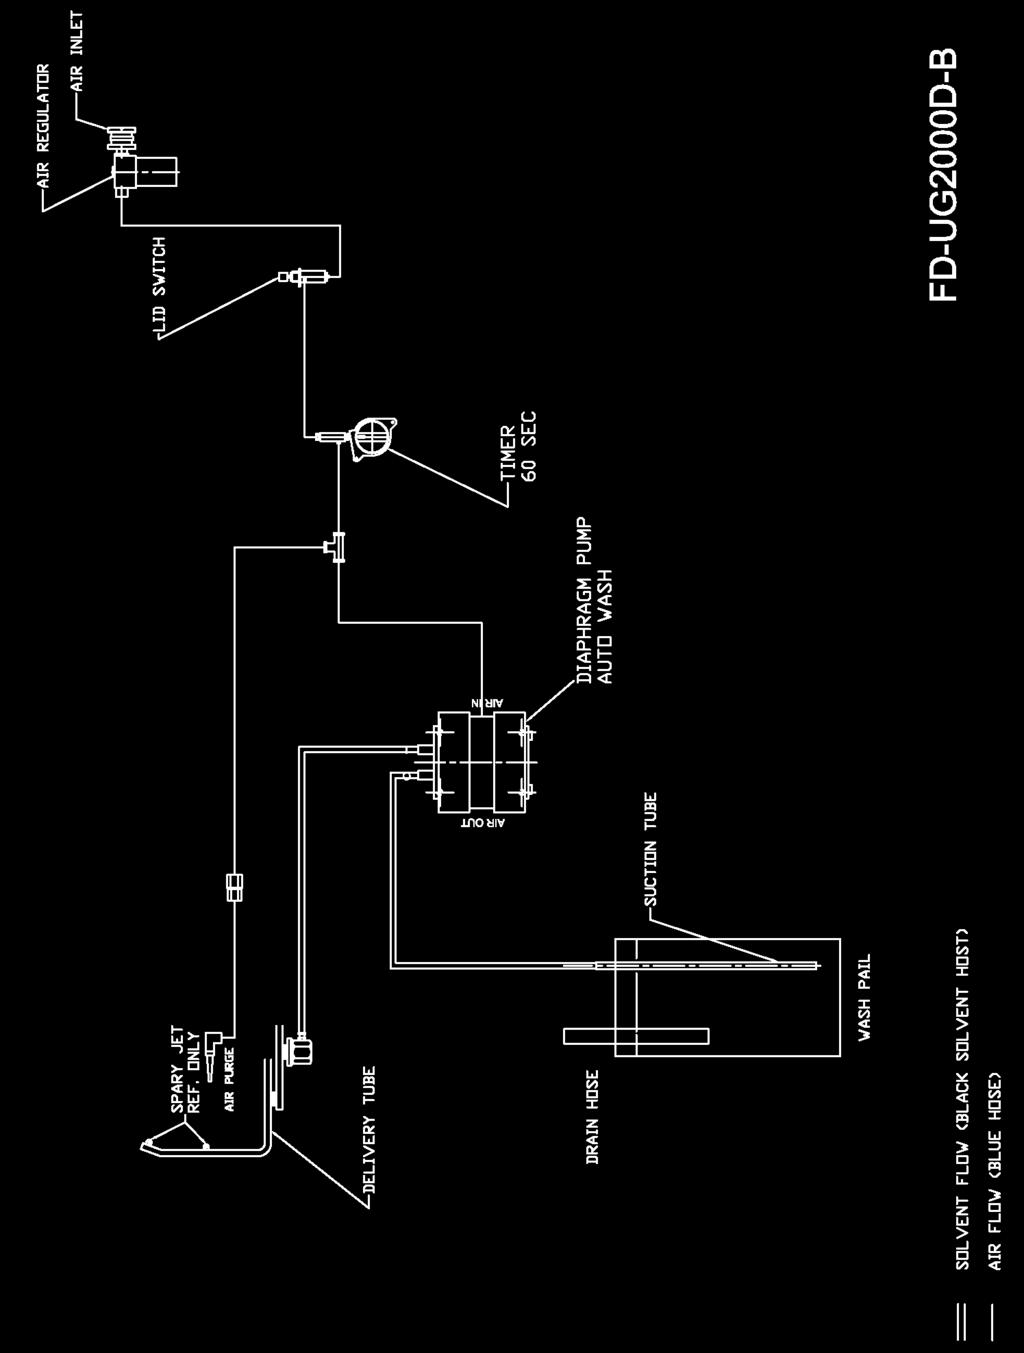 FLOW DIAGRAM Use the diagram to trace